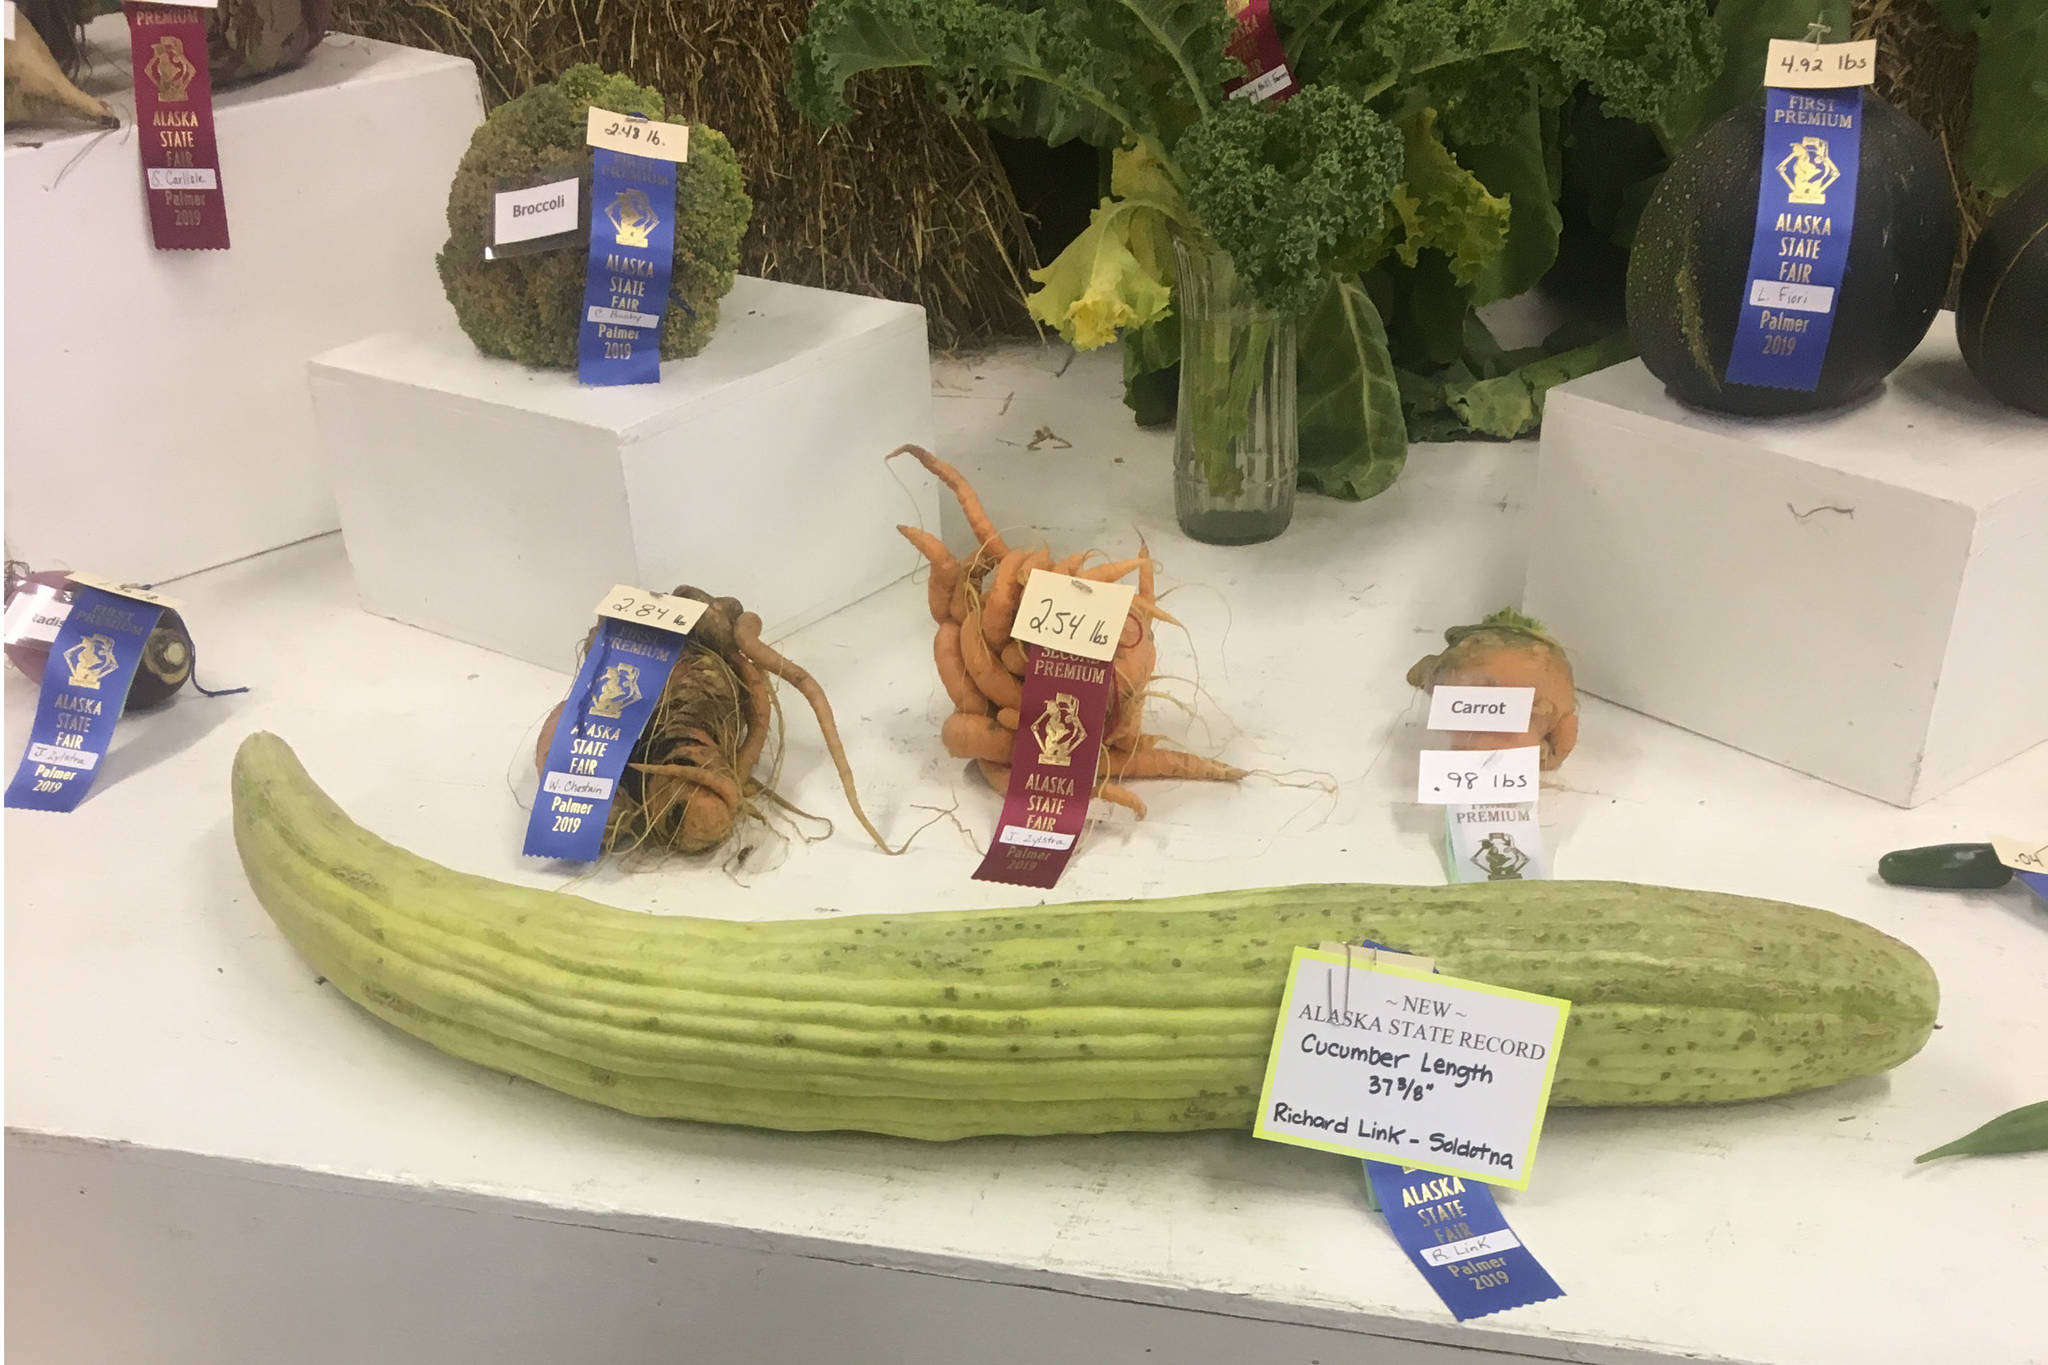 Richard Link’s prize-winning Armenian cucumber is seen here at the Alaska State Fair in Palmer, Alaska, in August 2019. (Courtesy Ludy Link)